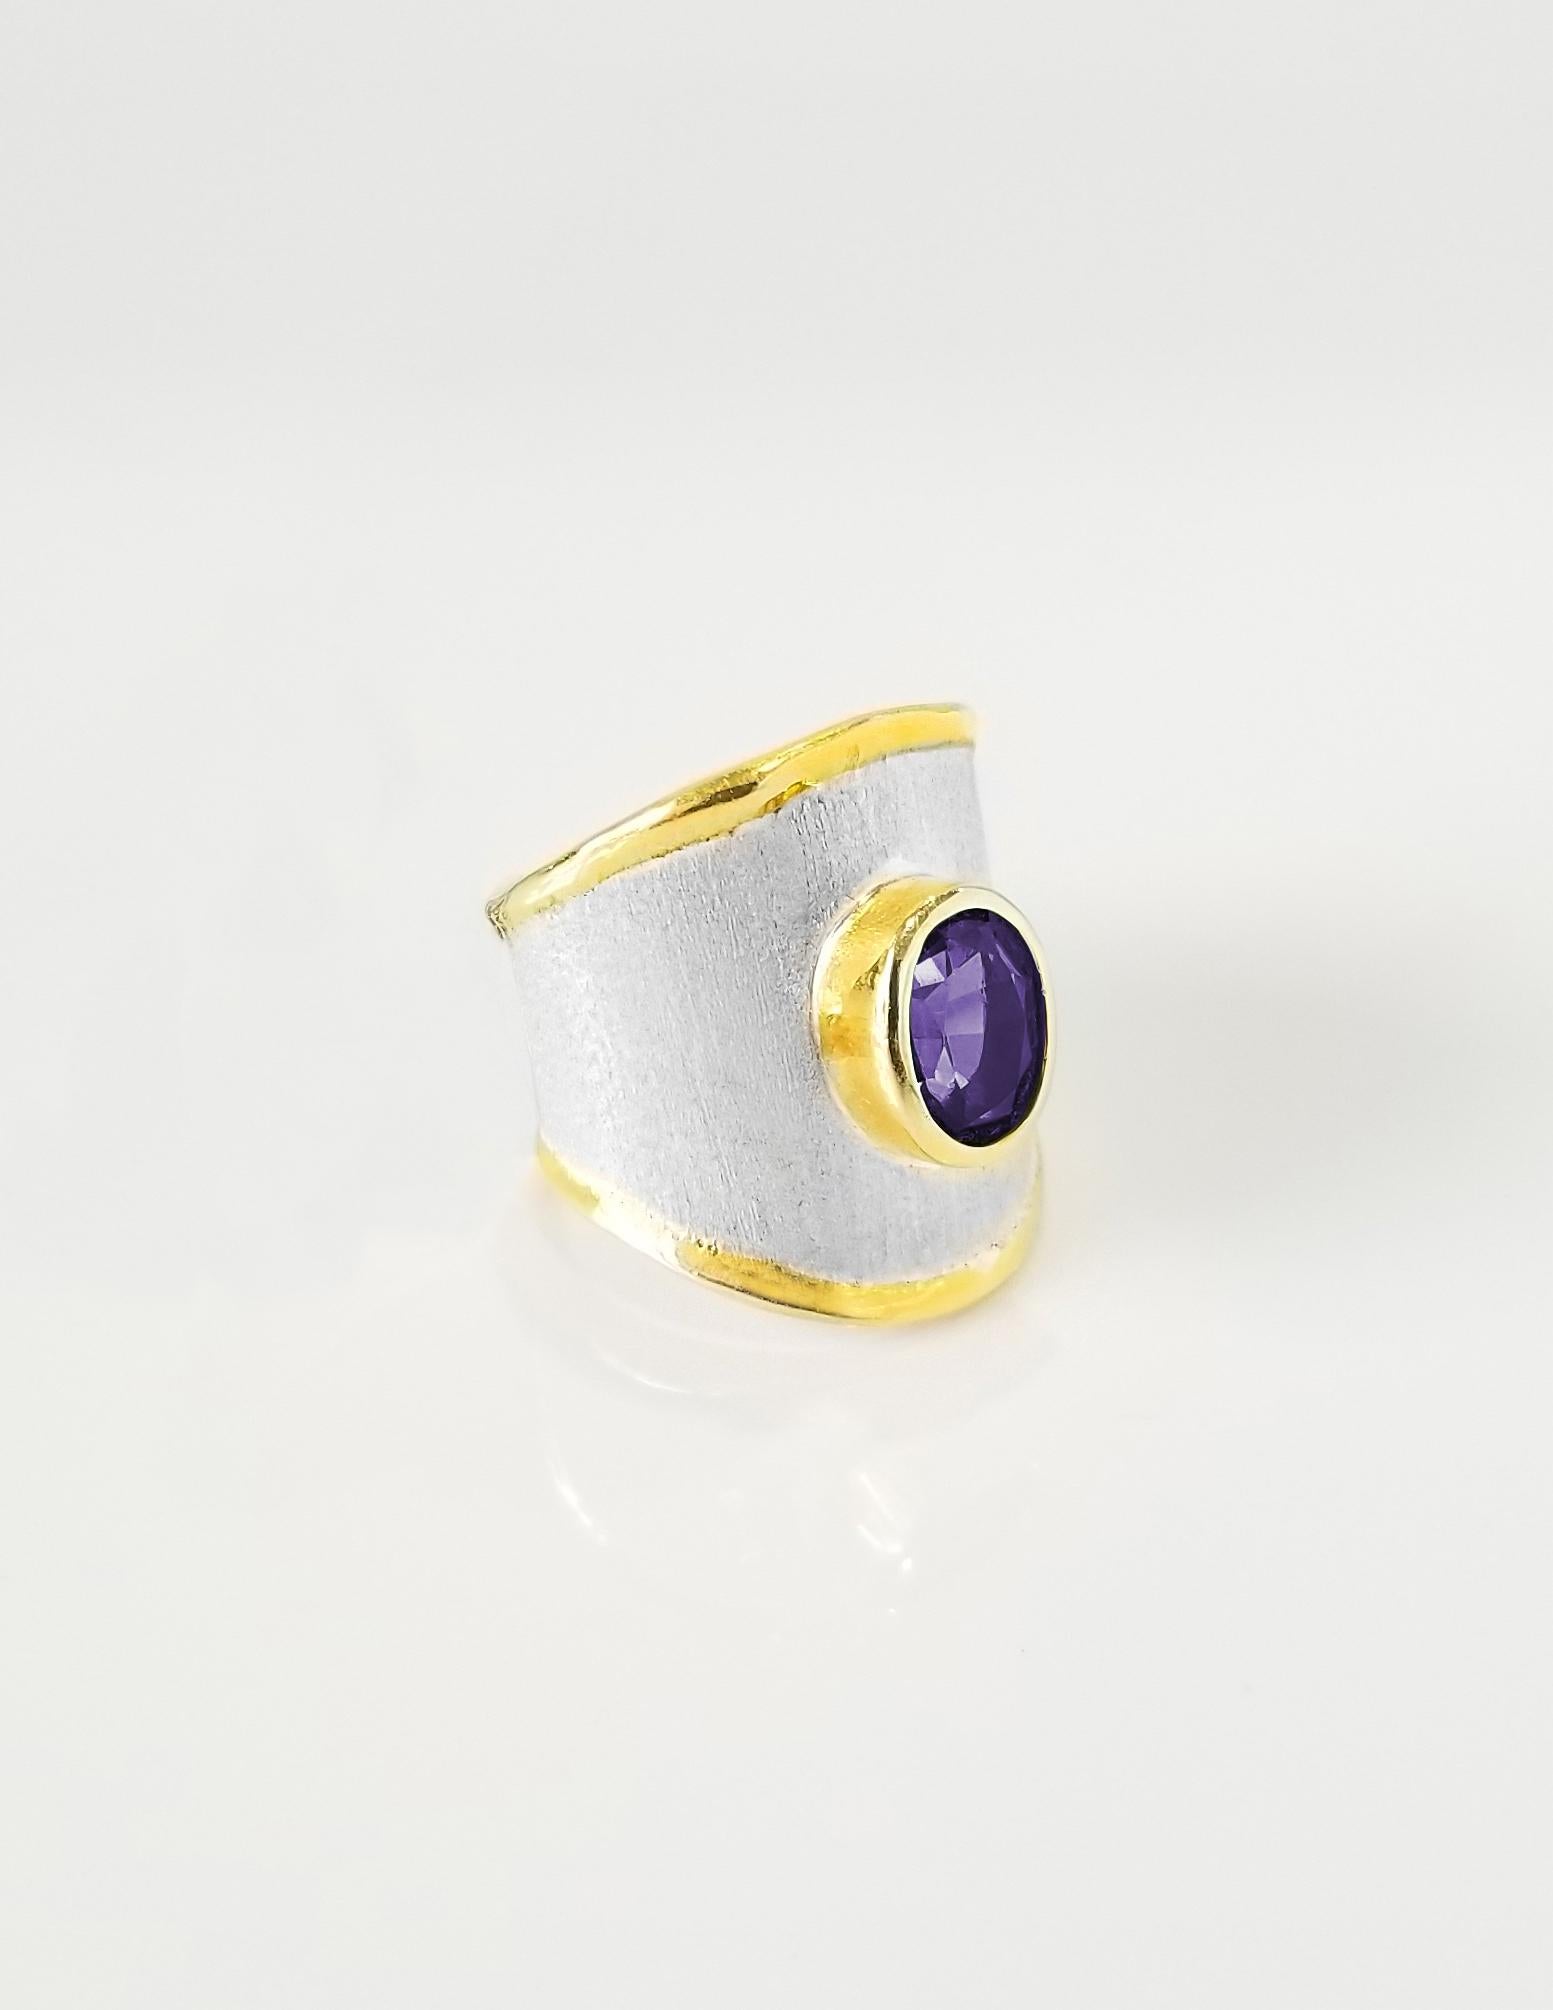 Women's or Men's Yianni Creations Amethyst Fine Silver and 24 Karat Gold Handmade Wide Band Ring